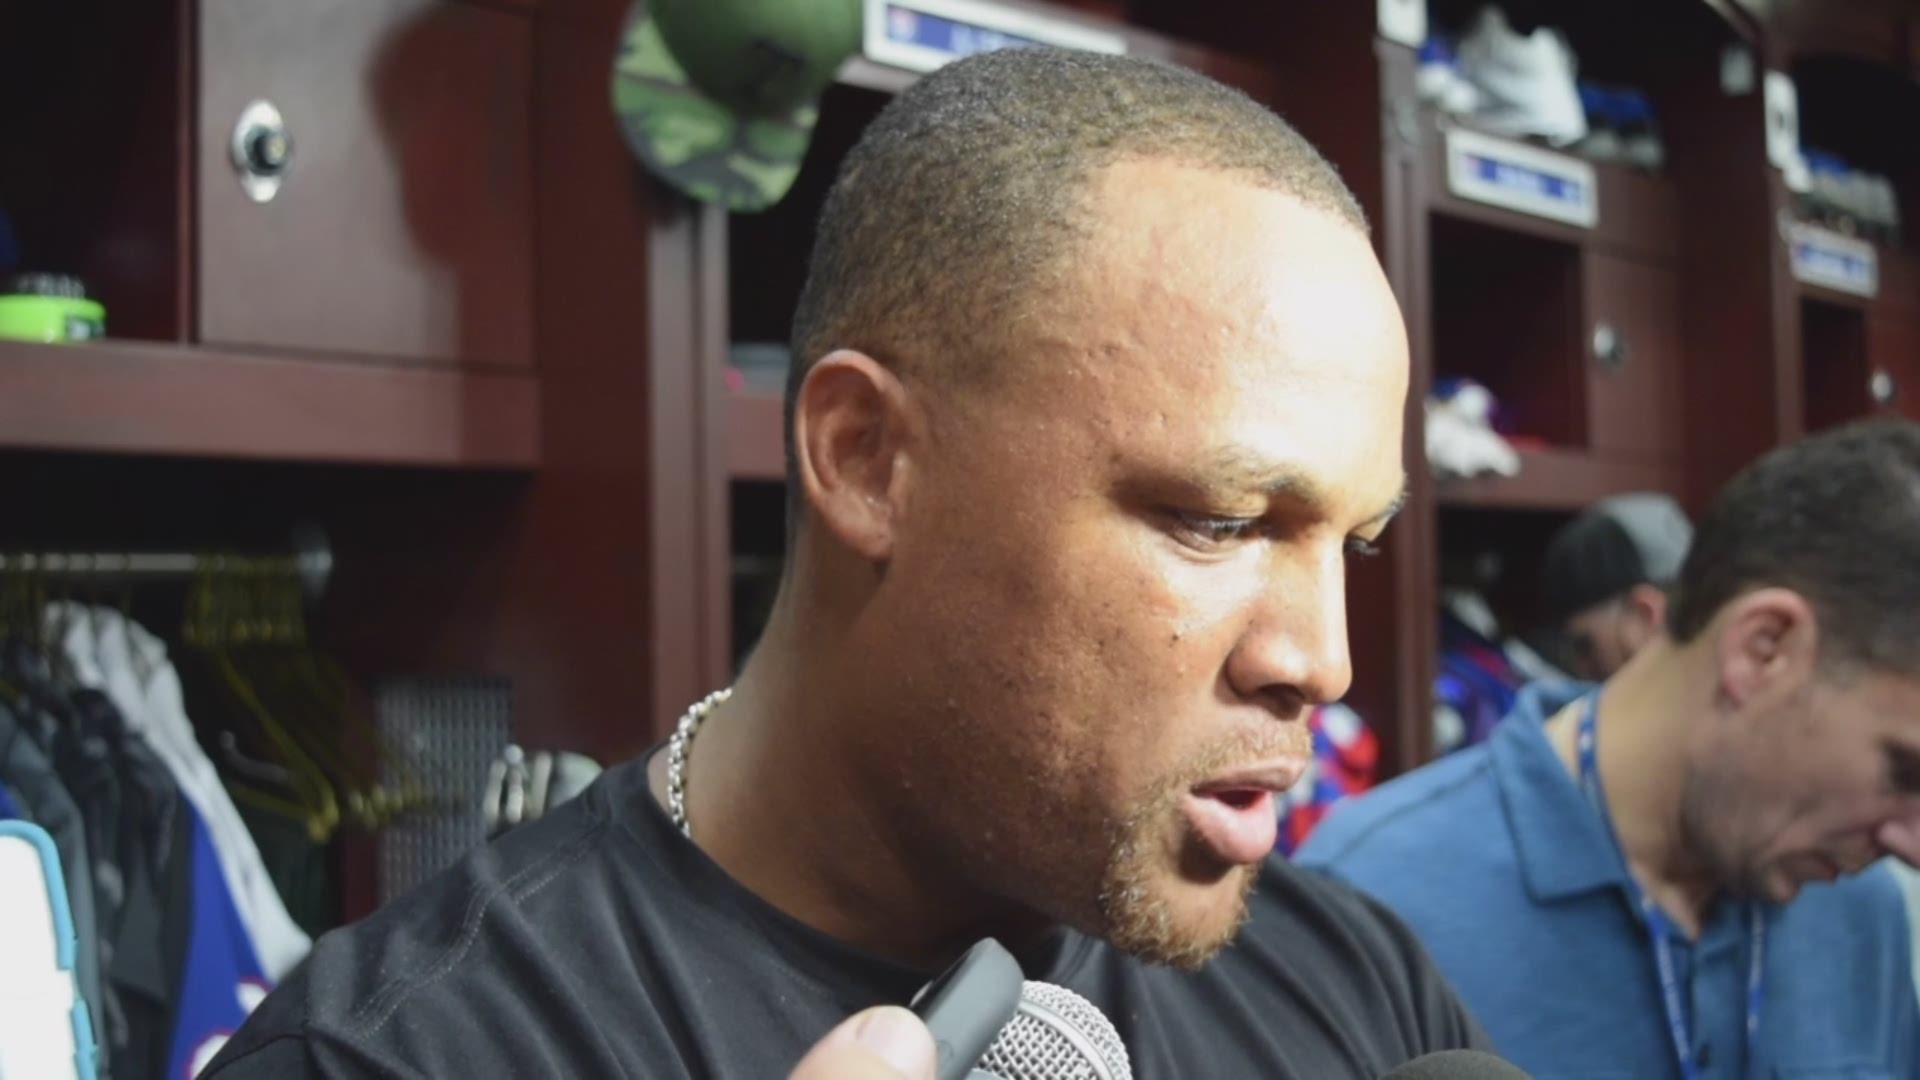 Adrian Beltre talks about his return to the Rangers, how he feels physically, and Joey Gallo's play in his stead.